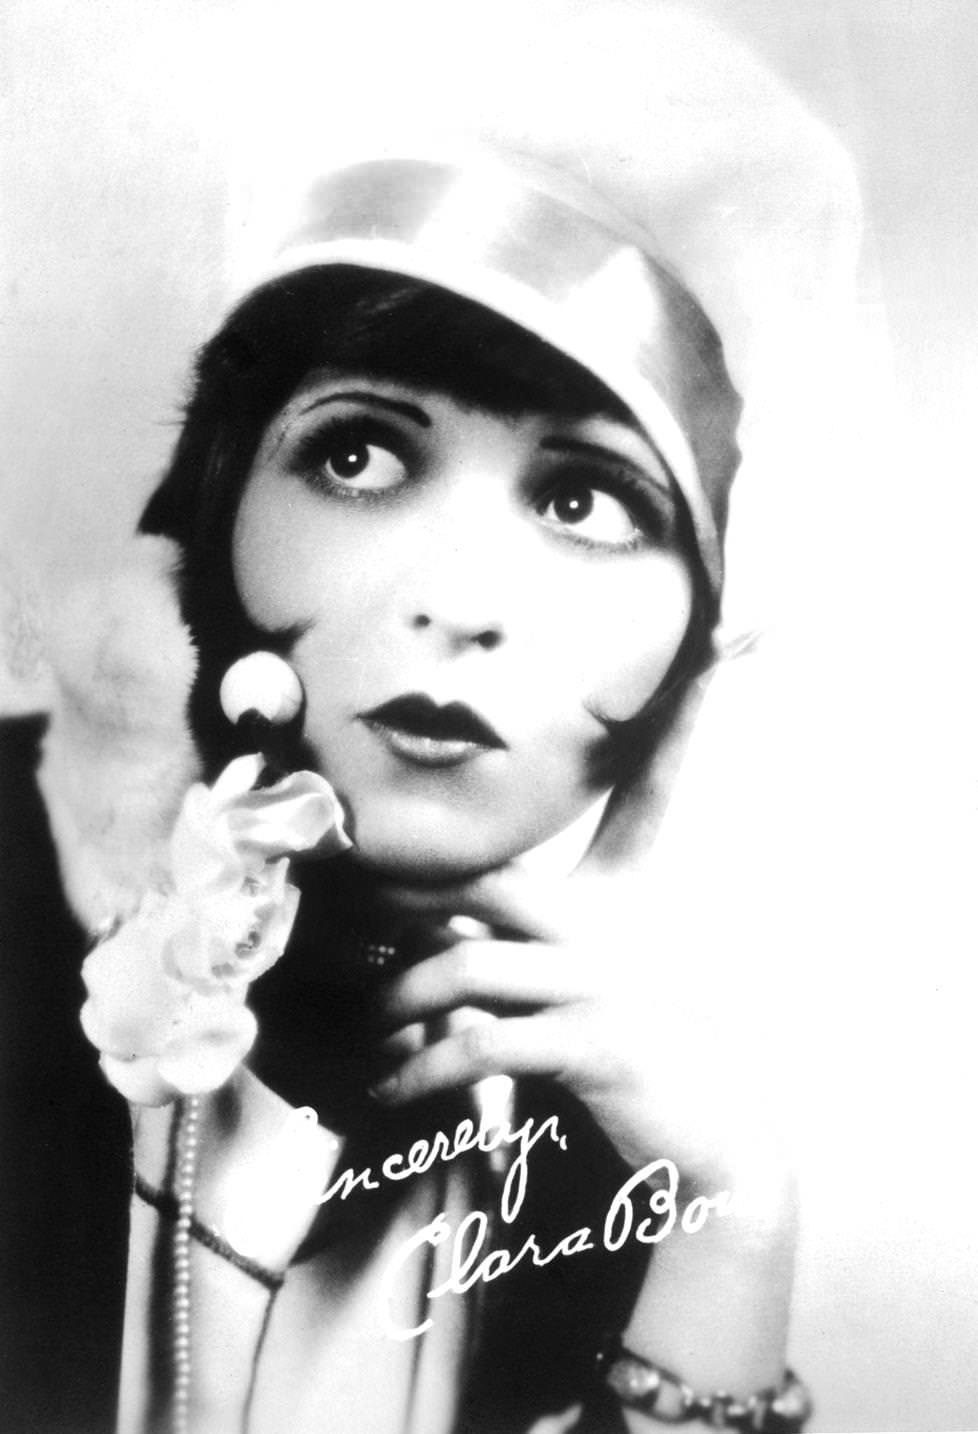 Autographed studio portrait of American actor Clara Bow wearing a cloche hat and a bobbed hairstyle while holding her hand to her face and pursing her lips, 1925